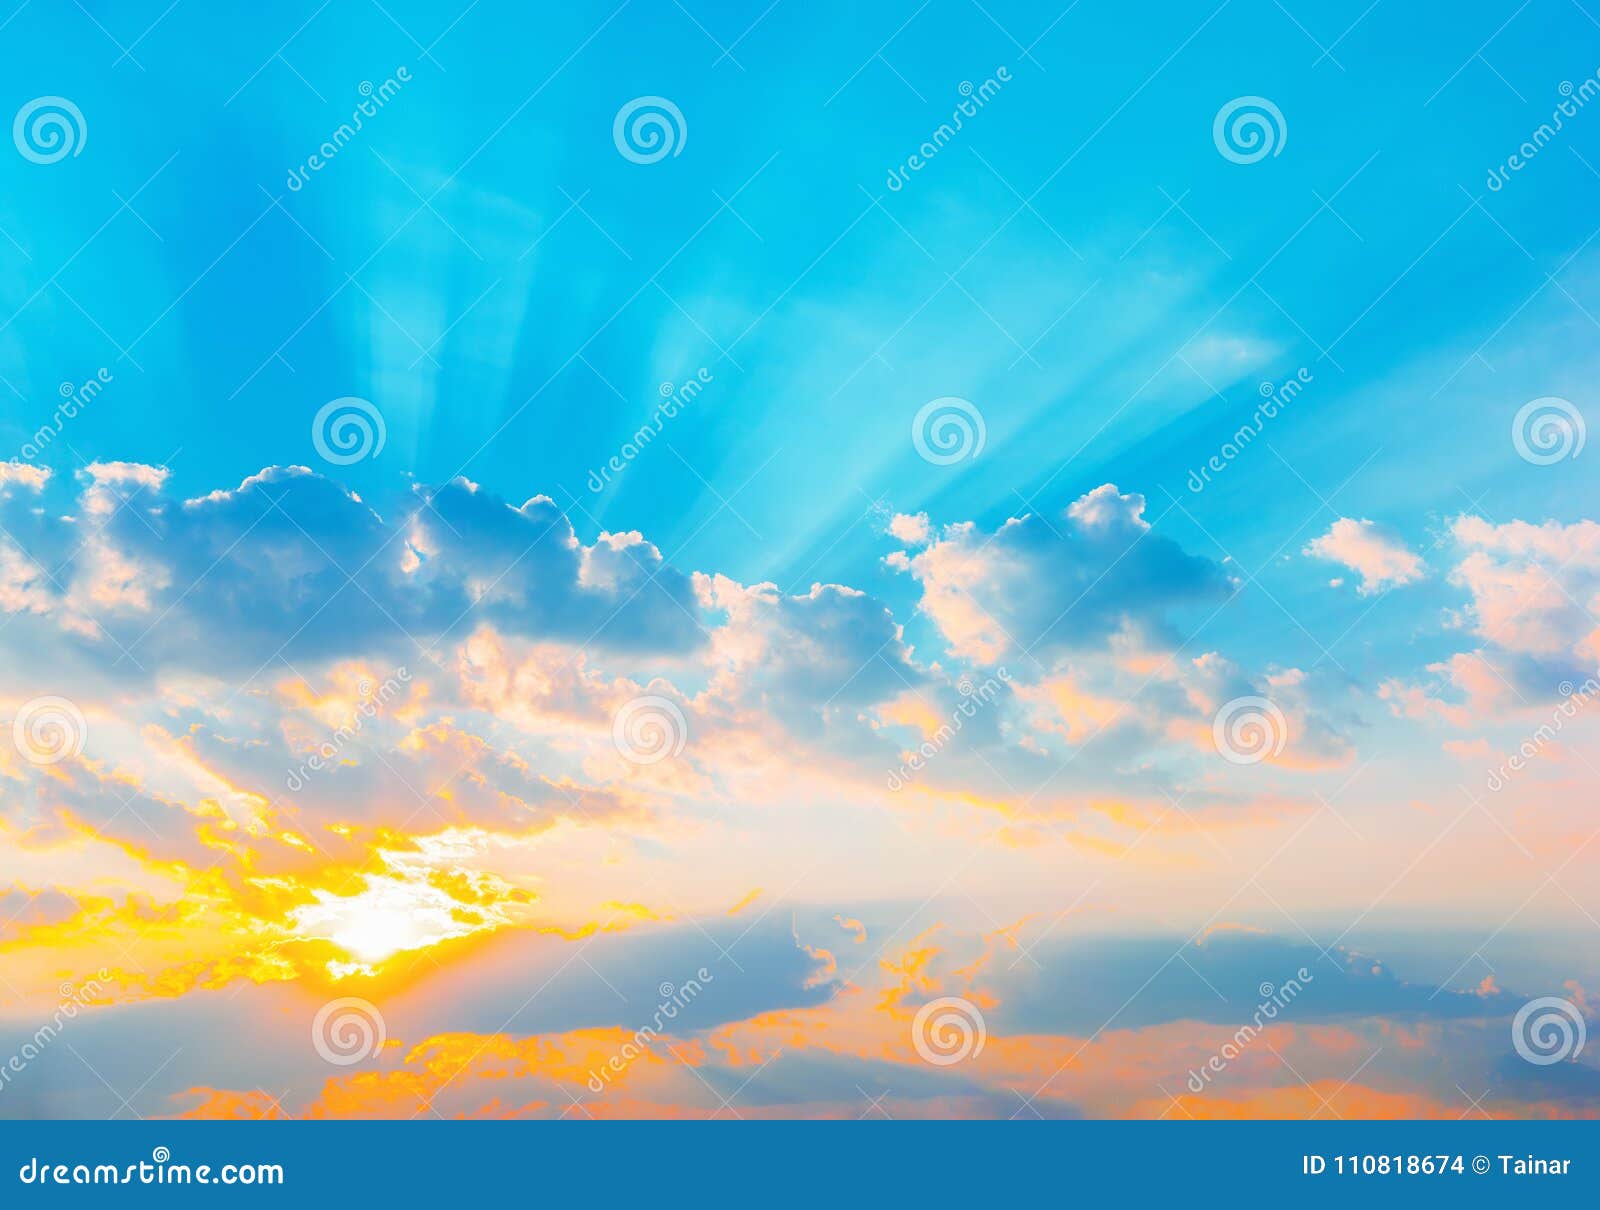 sunrise dramatic blue sky with orange sun rays breaking through the clouds. nature background. hope concept